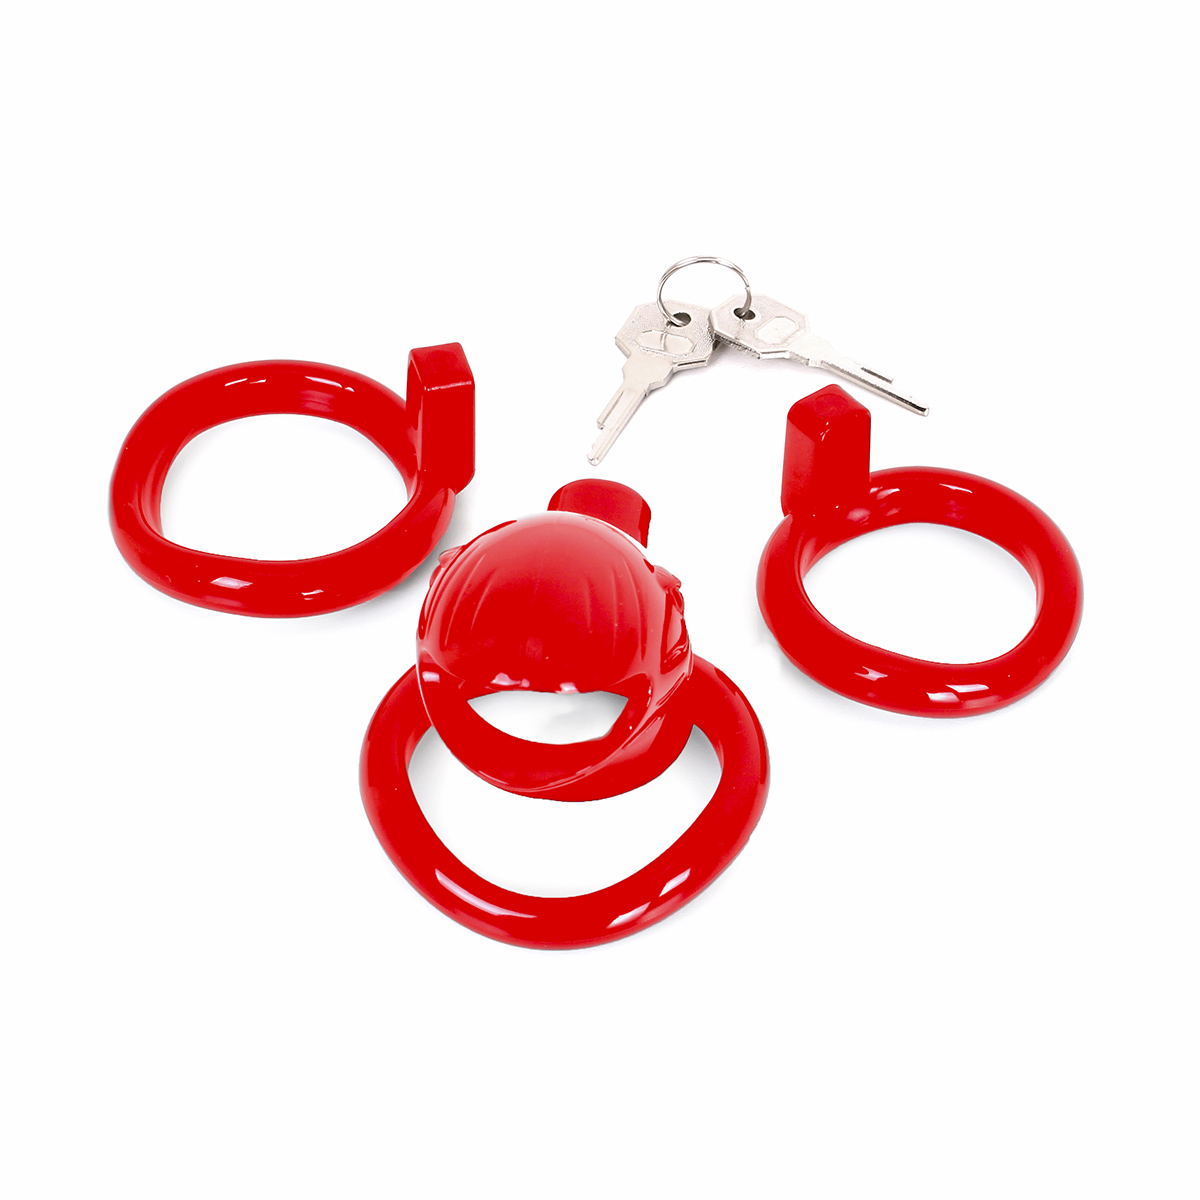 Plastic-Chastity-Cage-Red-OPR-3330057-4